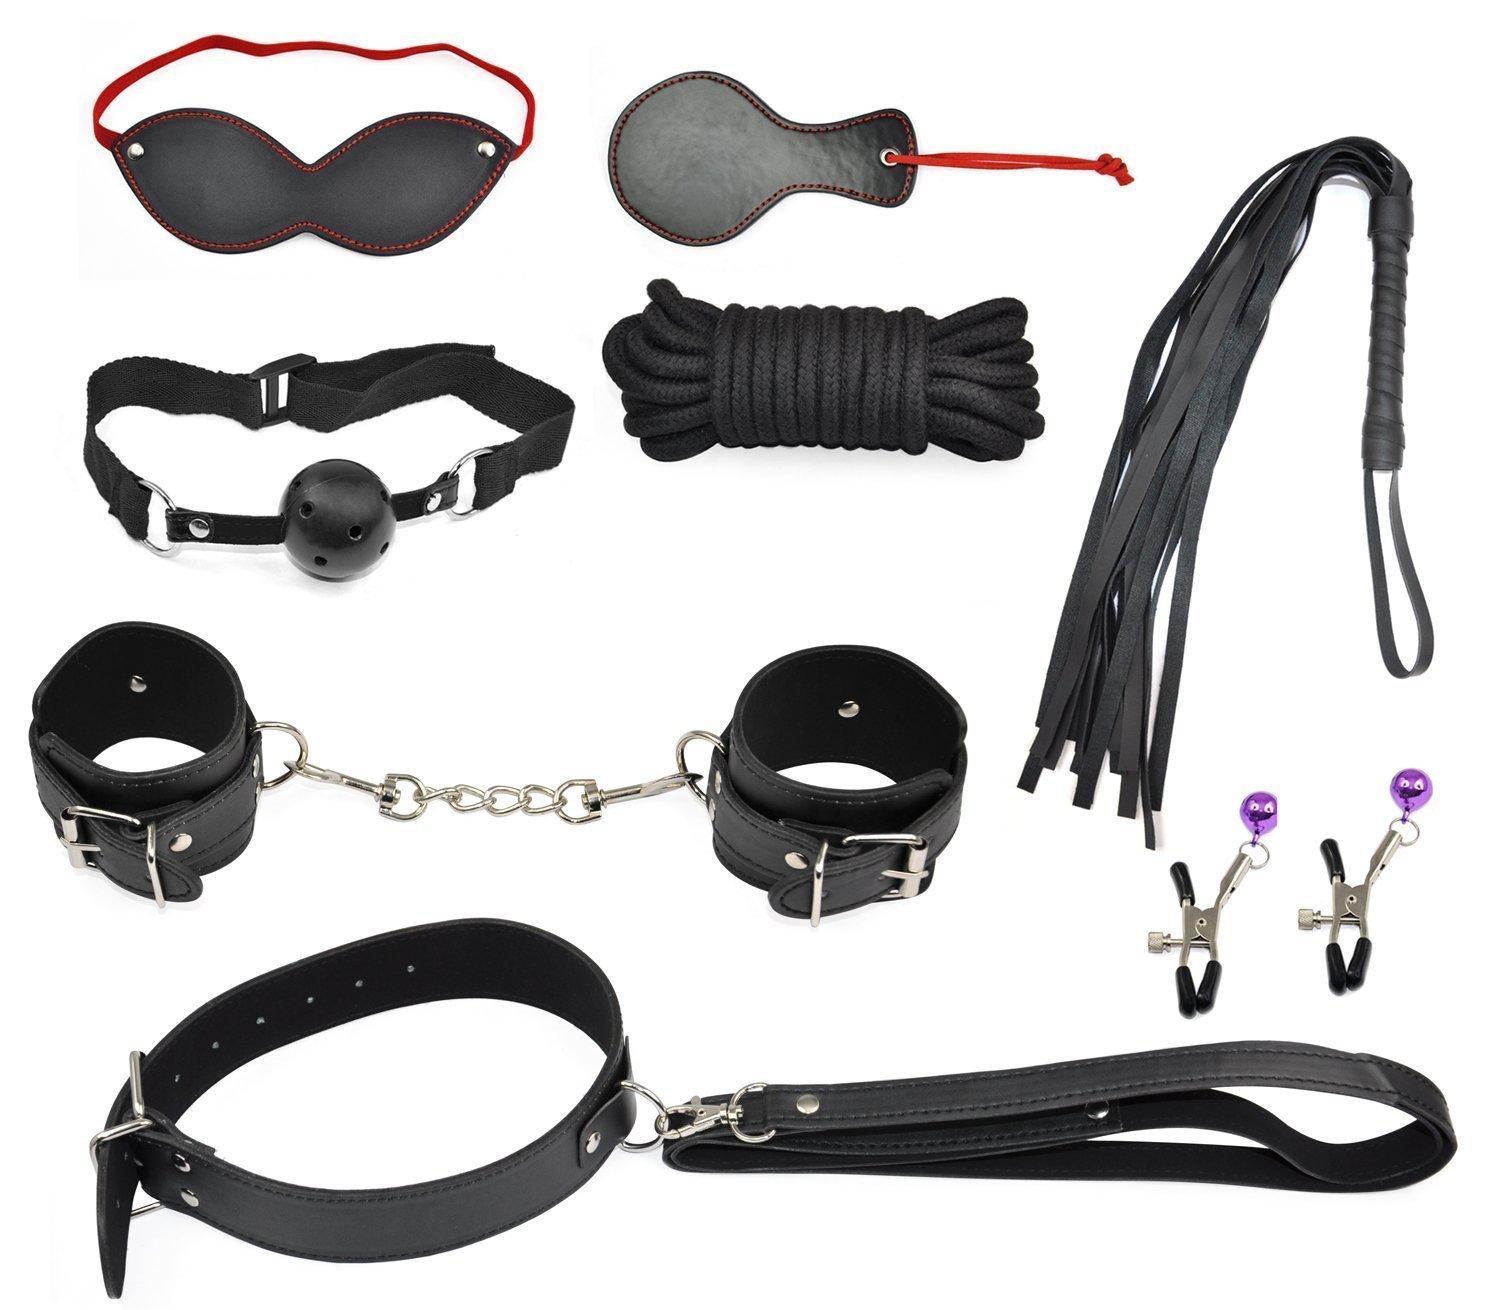 Good sites to buy bdsm equipment from